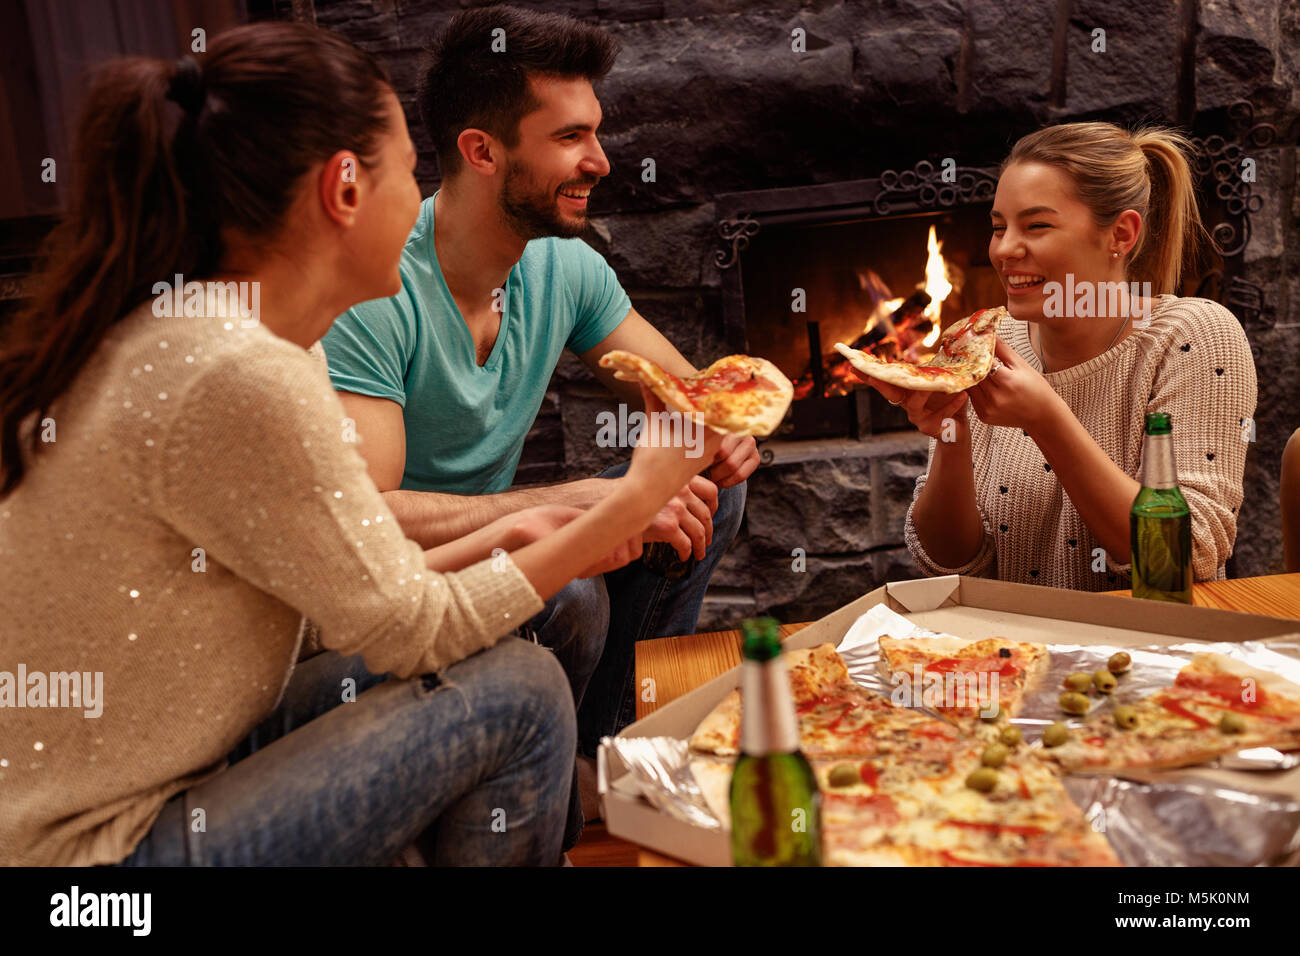 smiling friends having fun time together at home and eating pizza Stock Photo